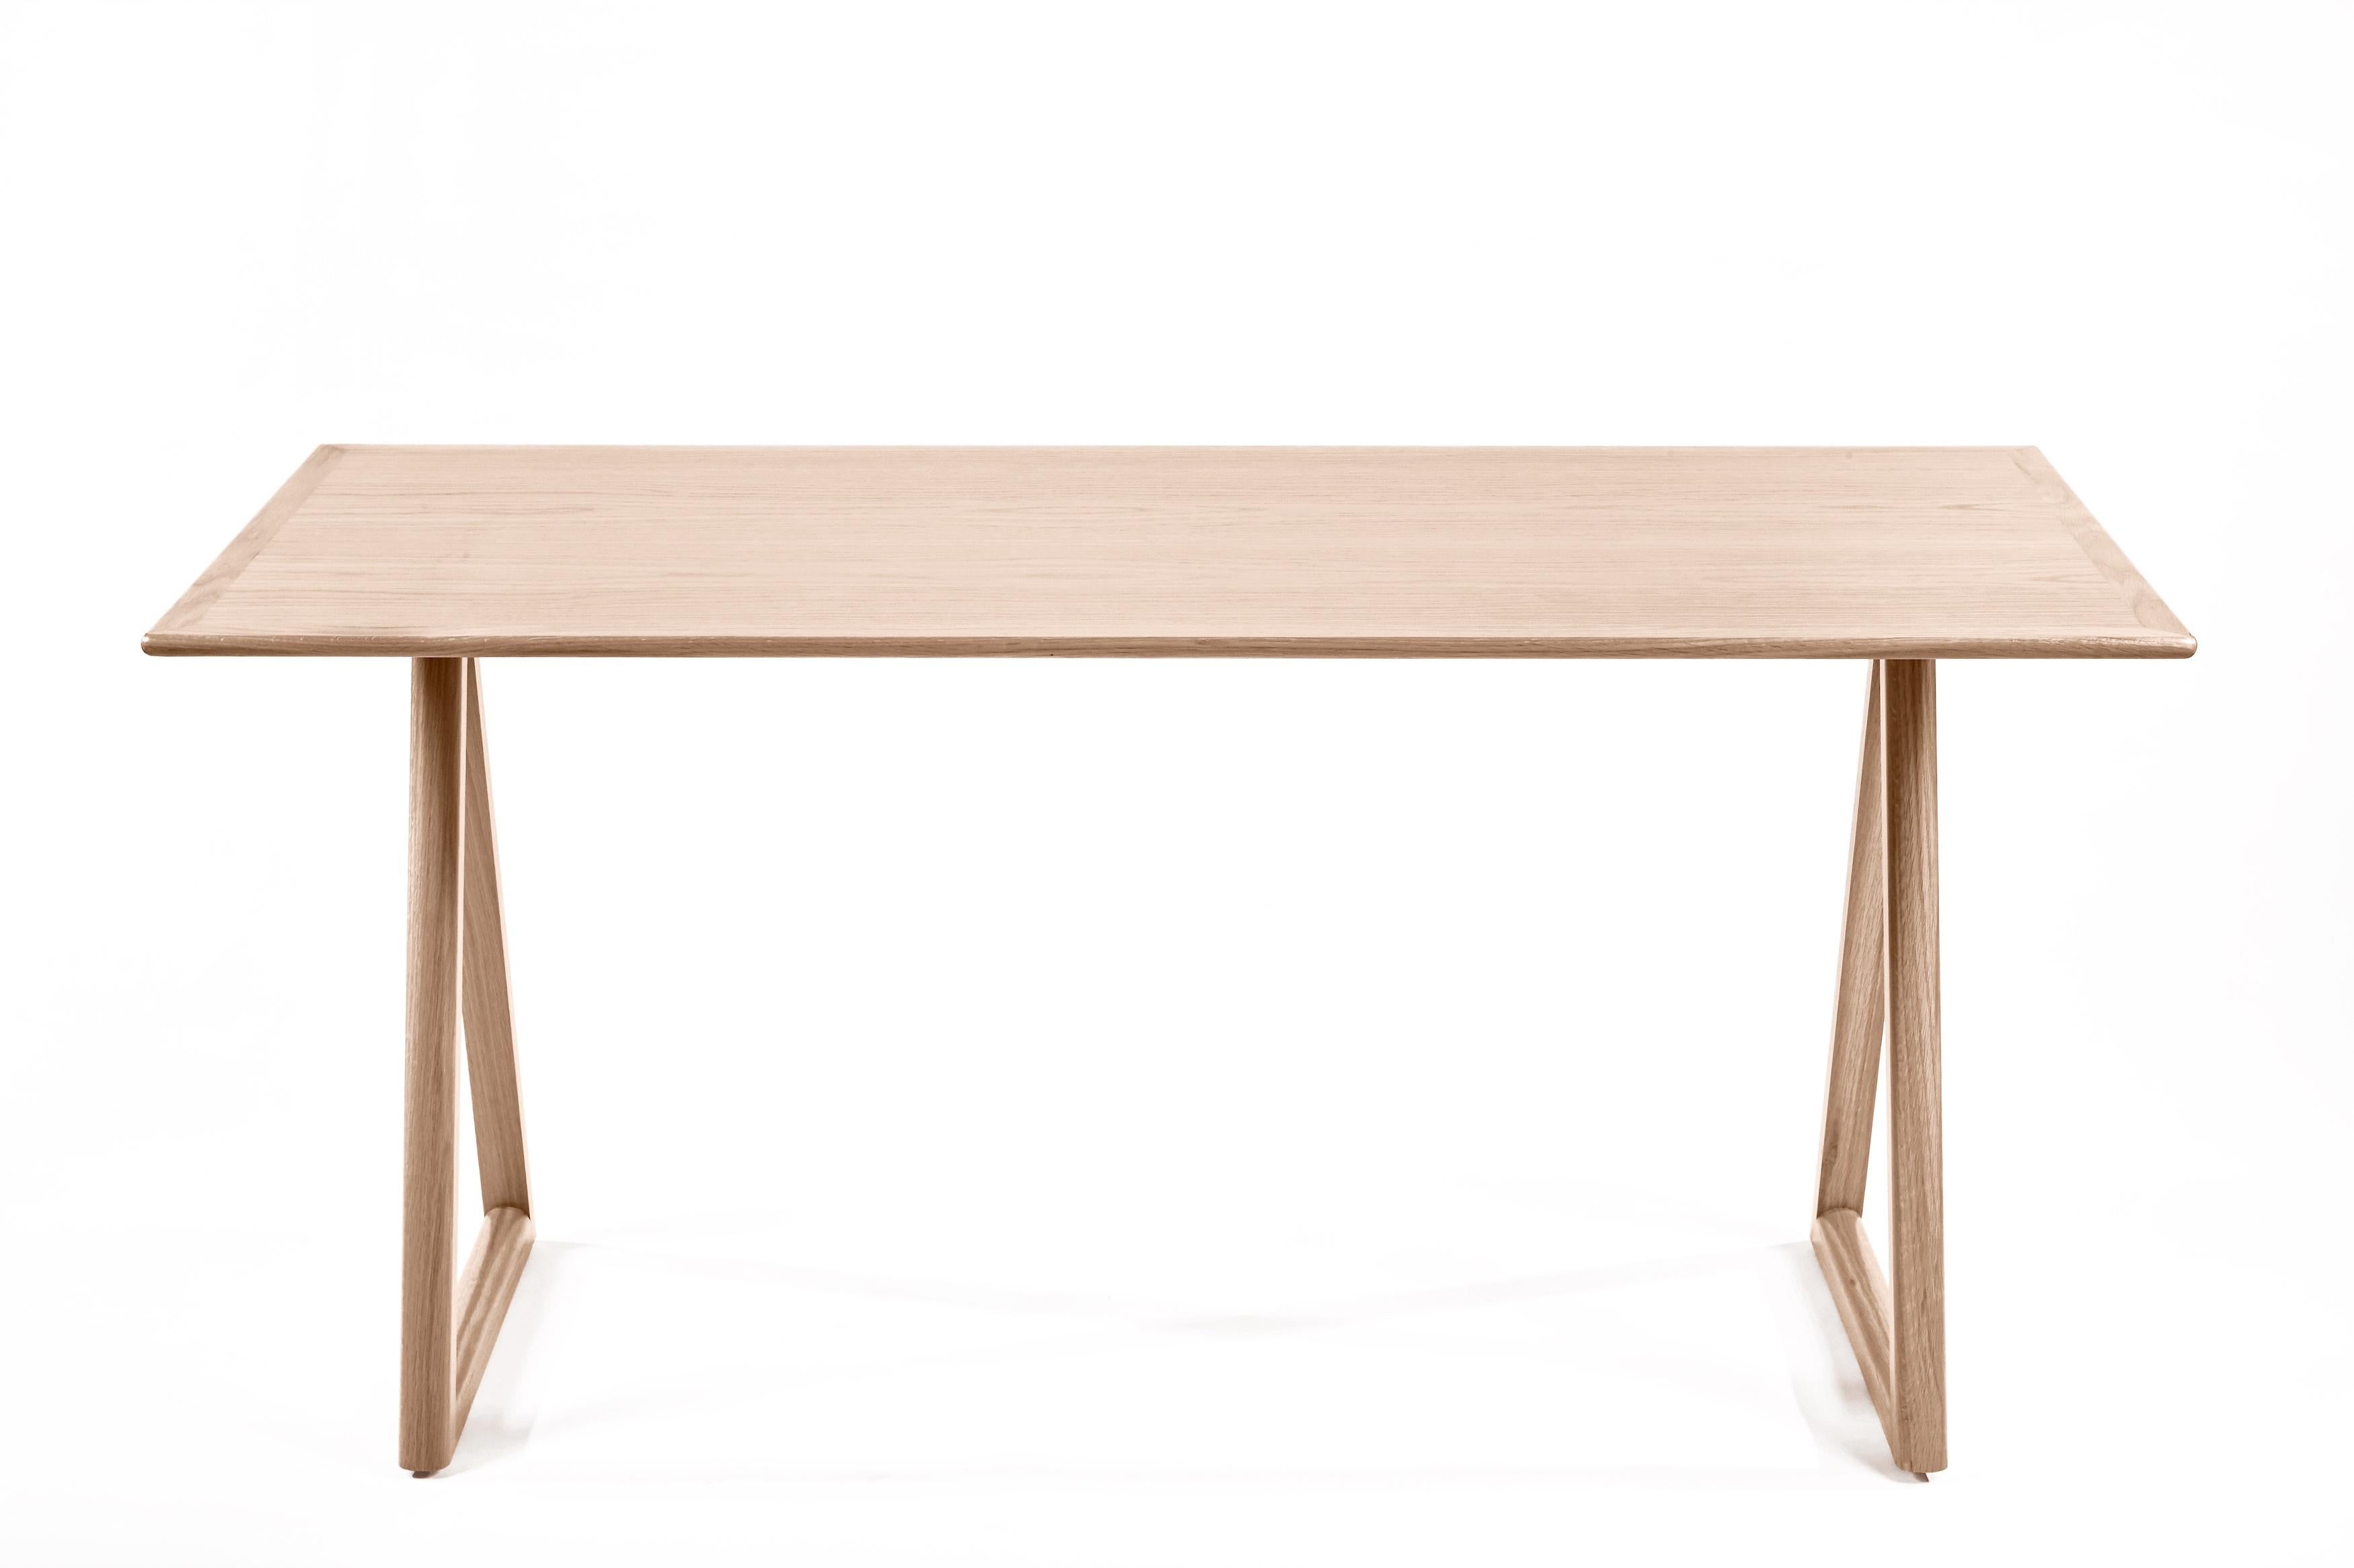 Meet our Porter Desk, showcasing modernist simplicity. This understated, piece pairs clean-lines and geometric forms. A simple, yet solid, bullnosed wooden top appears to float atop a pair of triangular-shaped supports. Bench made, in Los Angeles,